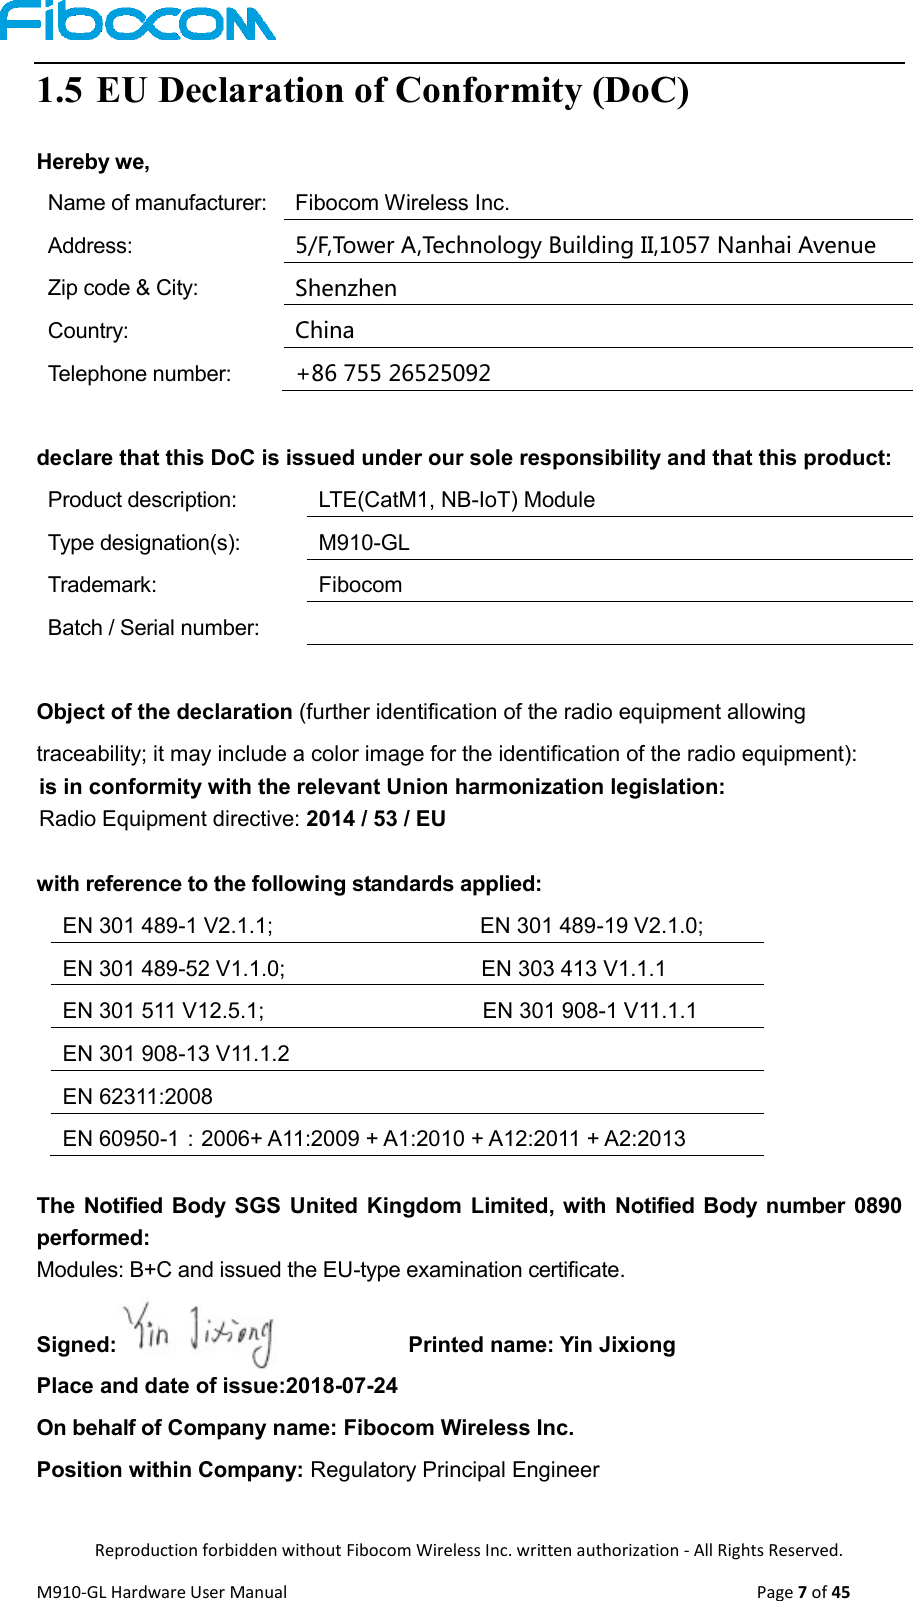  Reproduction forbidden without Fibocom Wireless Inc. written authorization - All Rights Reserved. M910-GL Hardware User Manual                                                                                                  Page 7 of 45  1.5 EU Declaration of Conformity (DoC) Hereby we, Name of manufacturer: Fibocom Wireless Inc. Address: 5/F,Tower A,Technology Building II,1057 Nanhai Avenue Zip code &amp; City: Shenzhen Country: China Telephone number: +86 755 26525092   declare that this DoC is issued under our sole responsibility and that this product: Product description: LTE(CatM1, NB-IoT) Module Type designation(s): M910-GL Trademark: Fibocom Batch / Serial number:    Object of the declaration (further identification of the radio equipment allowing traceability; it may include a color image for the identification of the radio equipment):   is in conformity with the relevant Union harmonization legislation:   Radio Equipment directive: 2014 / 53 / EU    with reference to the following standards applied: EN 301 489-1 V2.1.1;                                      EN 301 489-19 V2.1.0; EN 301 489-52 V1.1.0;                                    EN 303 413 V1.1.1 EN 301 511 V12.5.1;                                        EN 301 908-1 V11.1.1 EN 301 908-13 V11.1.2 EN 62311:2008 EN 60950-1：2006+ A11:2009 + A1:2010 + A12:2011 + A2:2013  The  Notified Body  SGS  United Kingdom Limited, with  Notified Body number  0890 performed:     Modules: B+C and issued the EU-type examination certificate.  Signed:                                                  Printed name: Yin Jixiong               Place and date of issue:2018-07-24               On behalf of Company name: Fibocom Wireless Inc. Position within Company: Regulatory Principal Engineer 